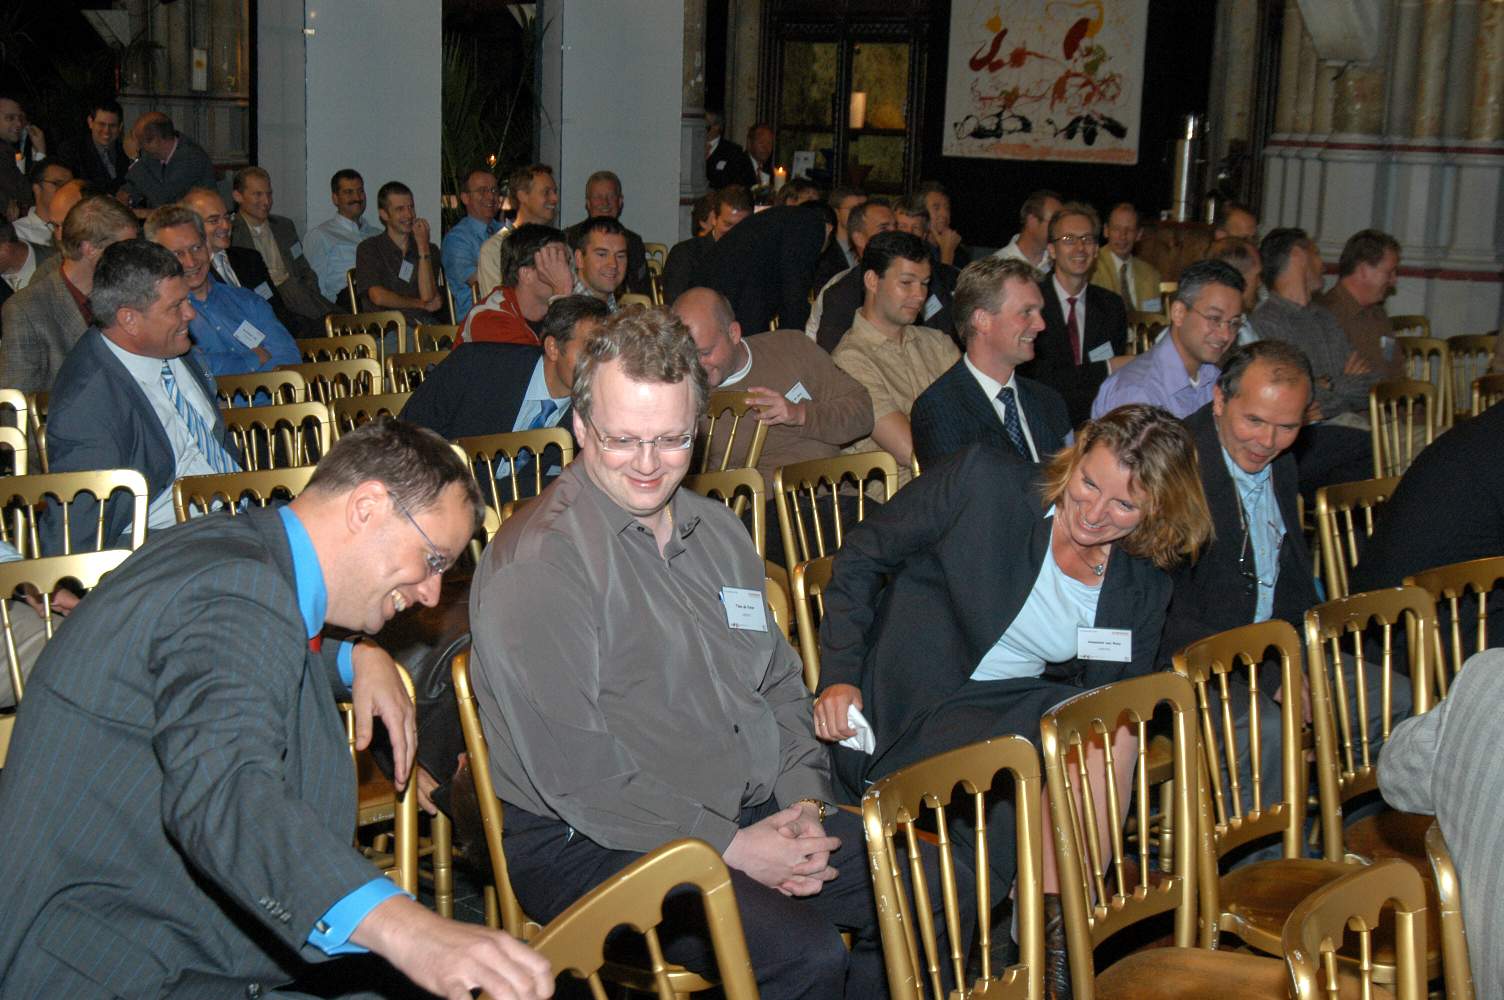 Compuware Customer Technology Briefing / Face 2 Face16 september 2004 - Orangerie Den BoschFoto door Erik van Roon
[#Beginning of Shooting Data Section]Nikon D100 
Focal Length: 35mm
White Balance: Auto
Color Mode: Mode I (sRGB)
2004/09/16 13:31:53.9
Exposure Mode: Aperture Priority
AF Mode: AF-S
Hue Adjustment: 0°
JPEG (8-bit) Fine
Metering Mode: Center-Weighted
Tone Comp: Auto
Sharpening: Auto
Image Size:  Large (3008 x 2000)
1/60 sec - f/6.3
Flash Sync Mode: Front Curtain
Noise Reduction: OFF
Exposure Comp.: 0 EV
Auto Flash Mode: D-TTL
Image Comment:                                     
[#End of Shooting Data Section]